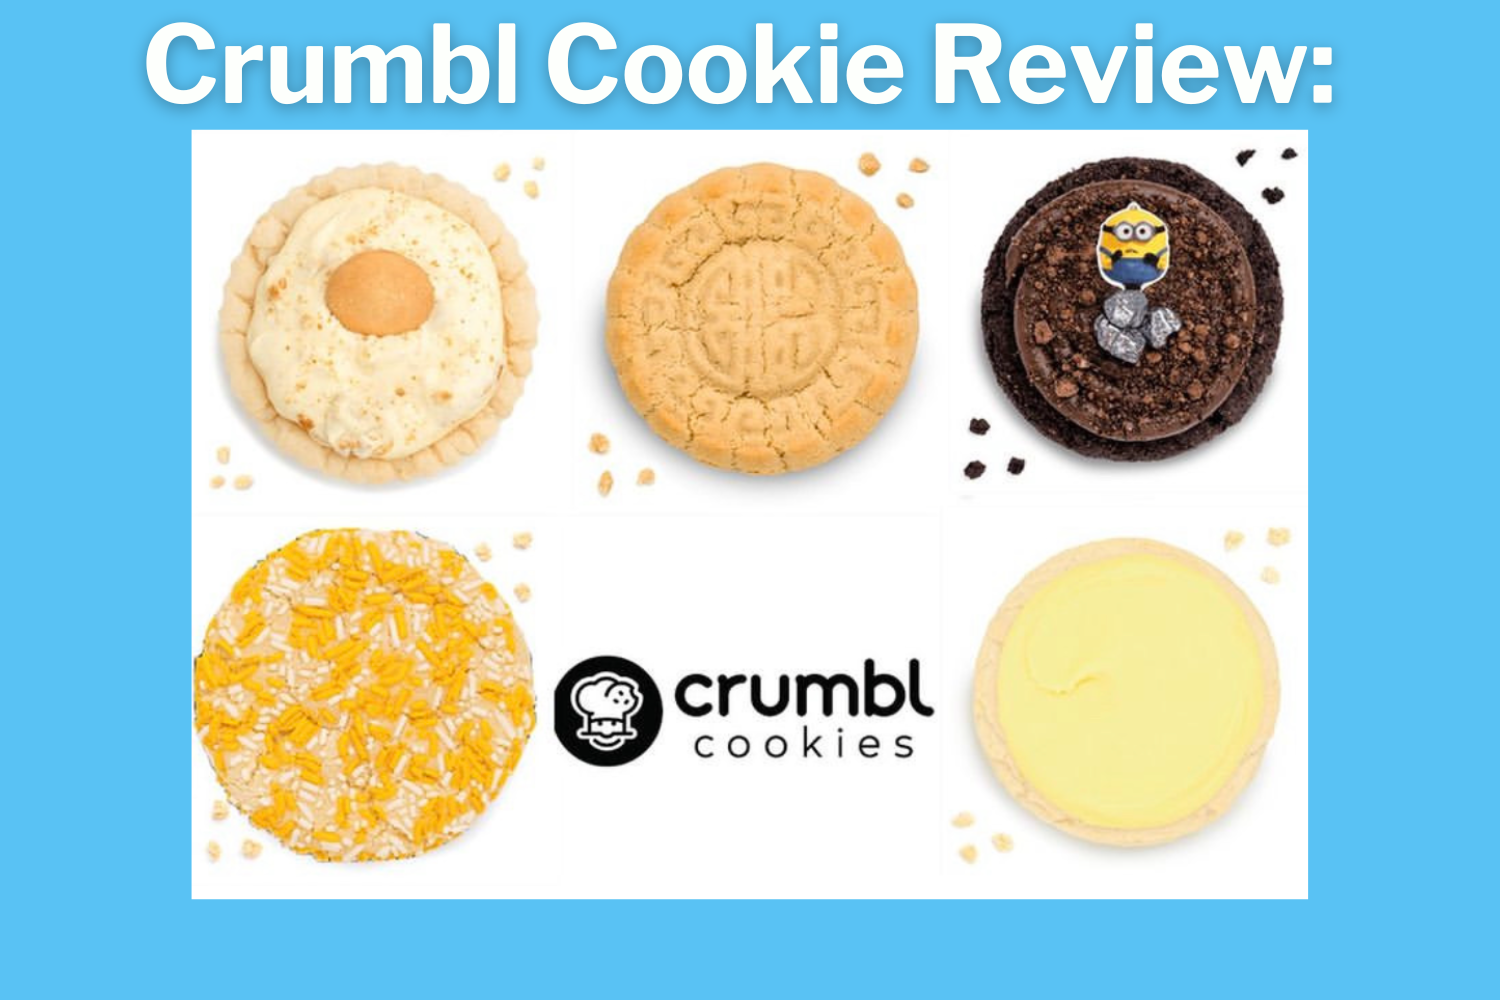 21 Crumbl Cookie Flavors Ranked Best to Worst - Let's Eat Cake